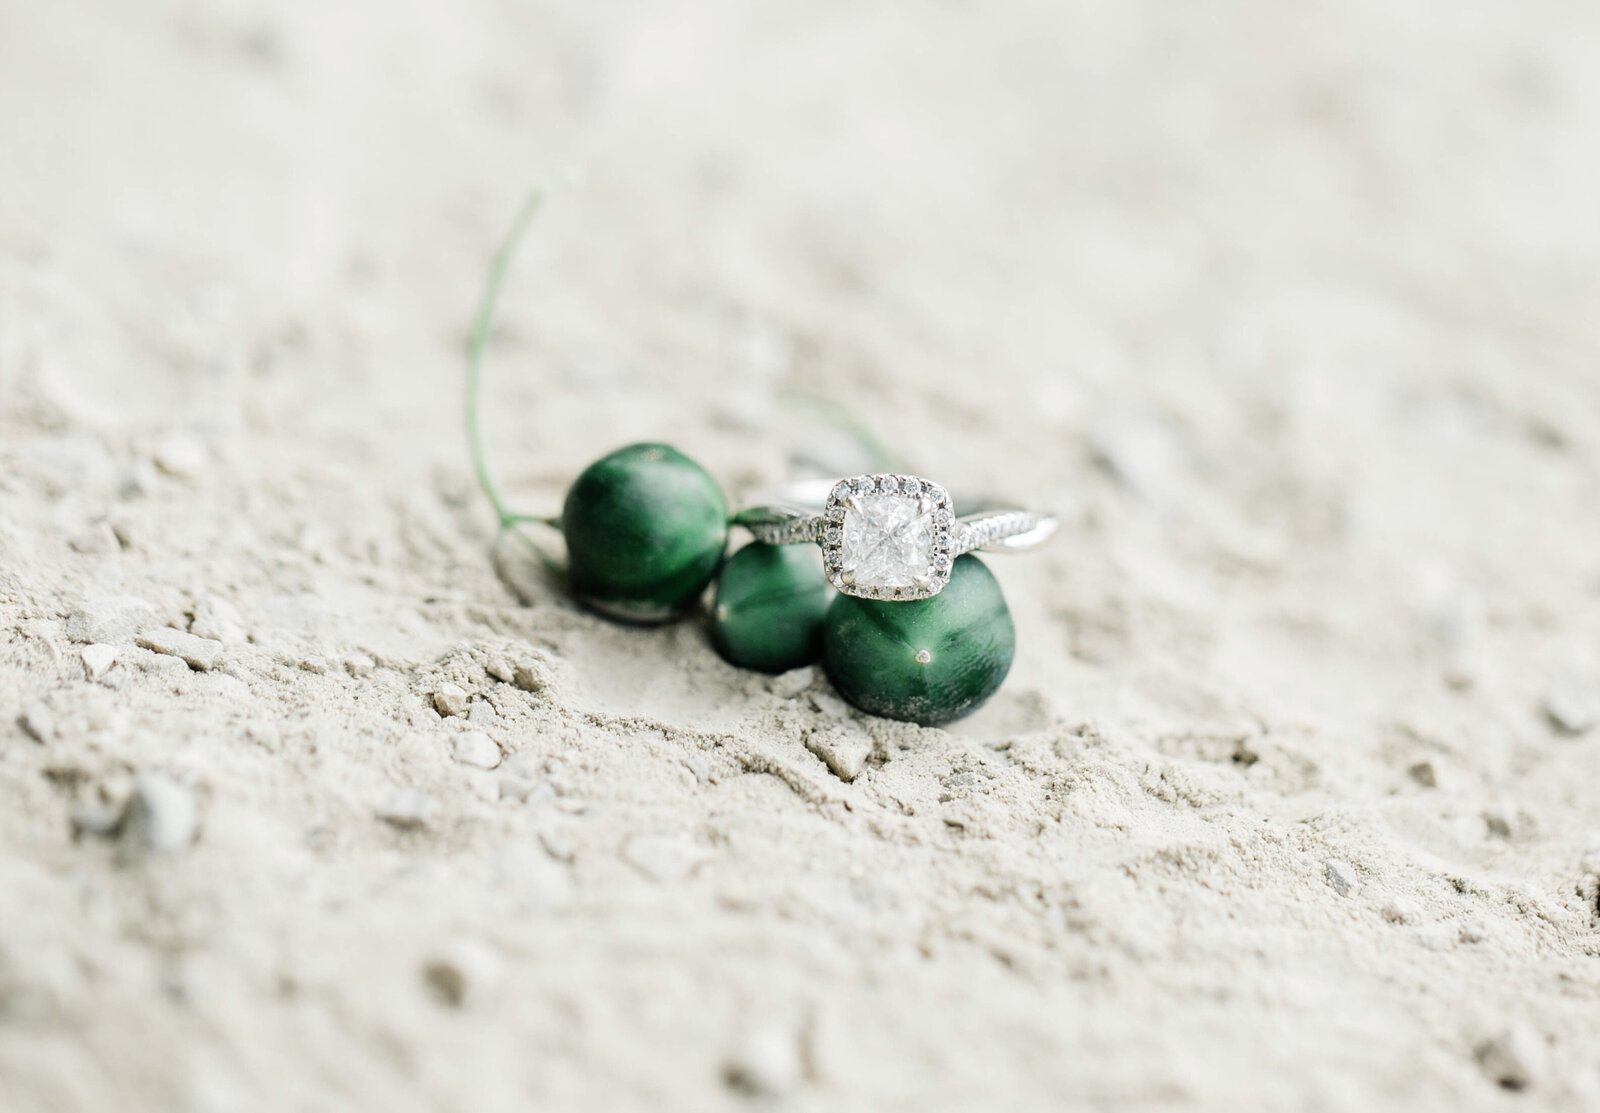 Diamond Engagement Ring on green berries in the sand